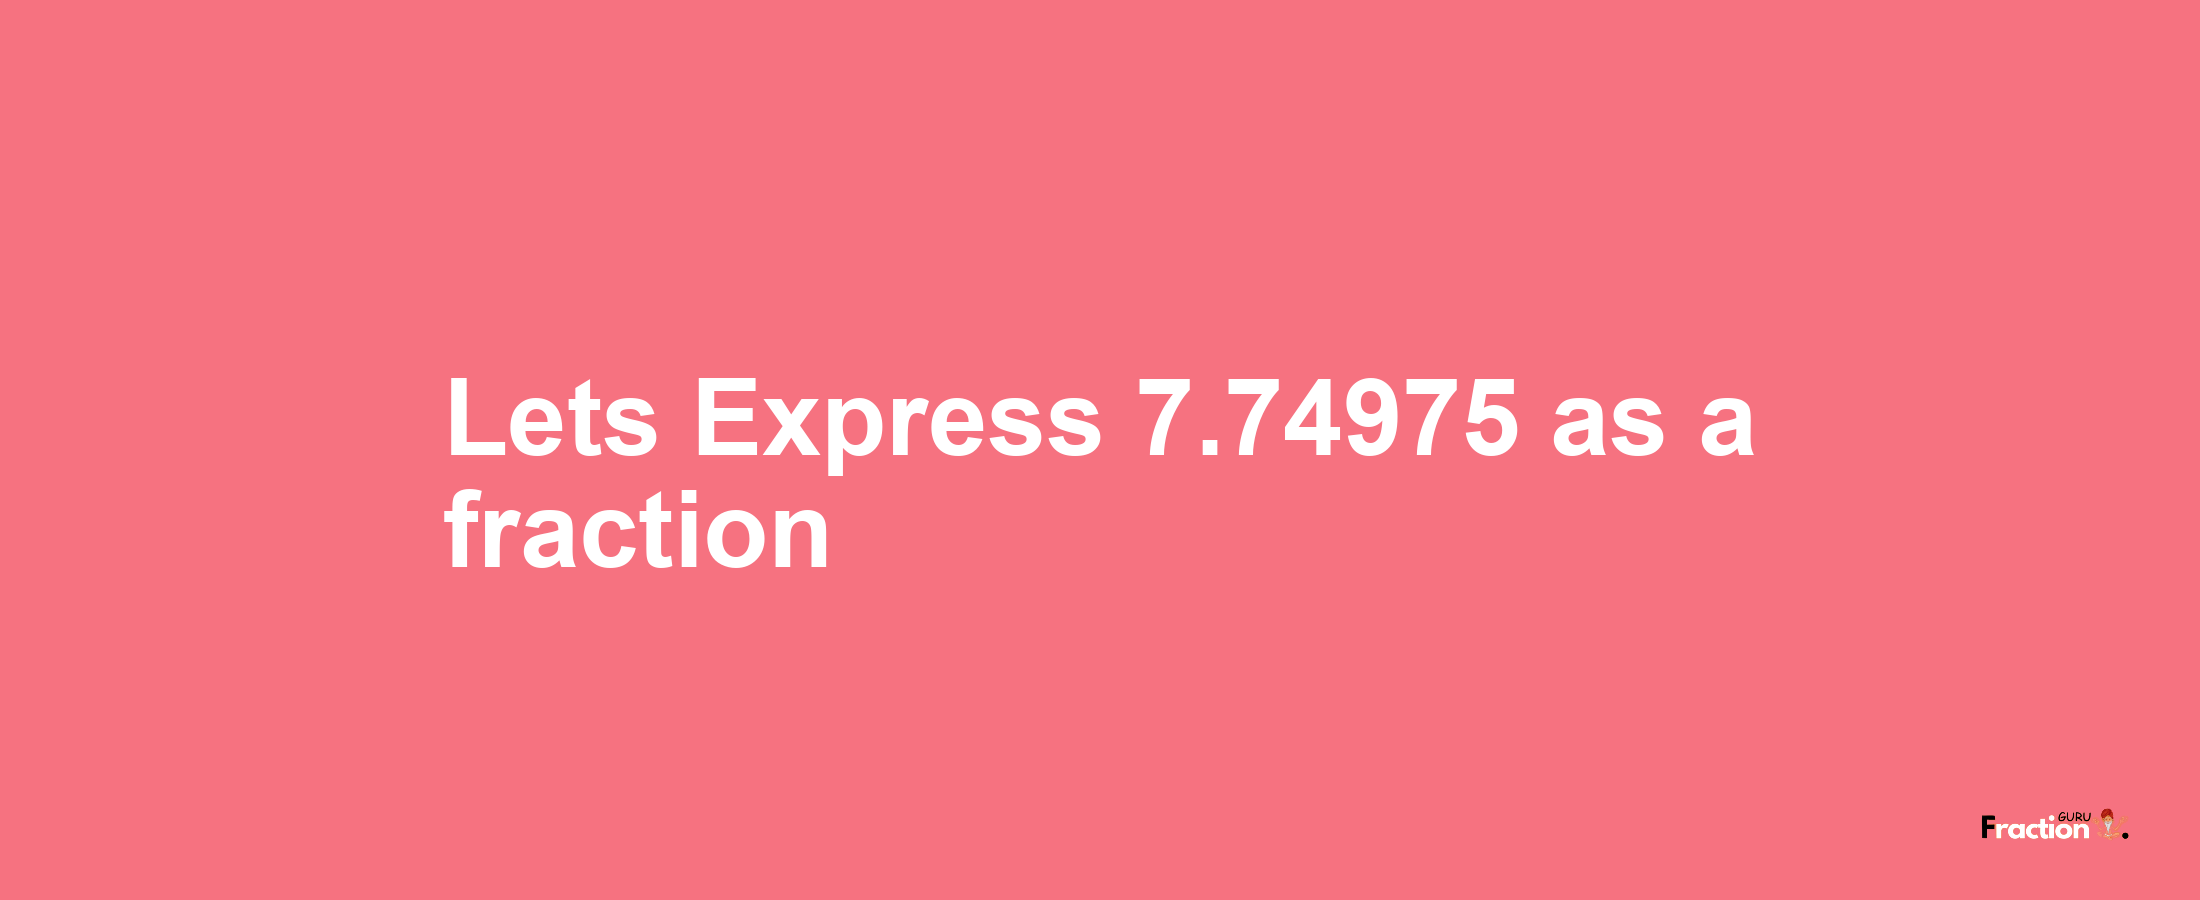 Lets Express 7.74975 as afraction